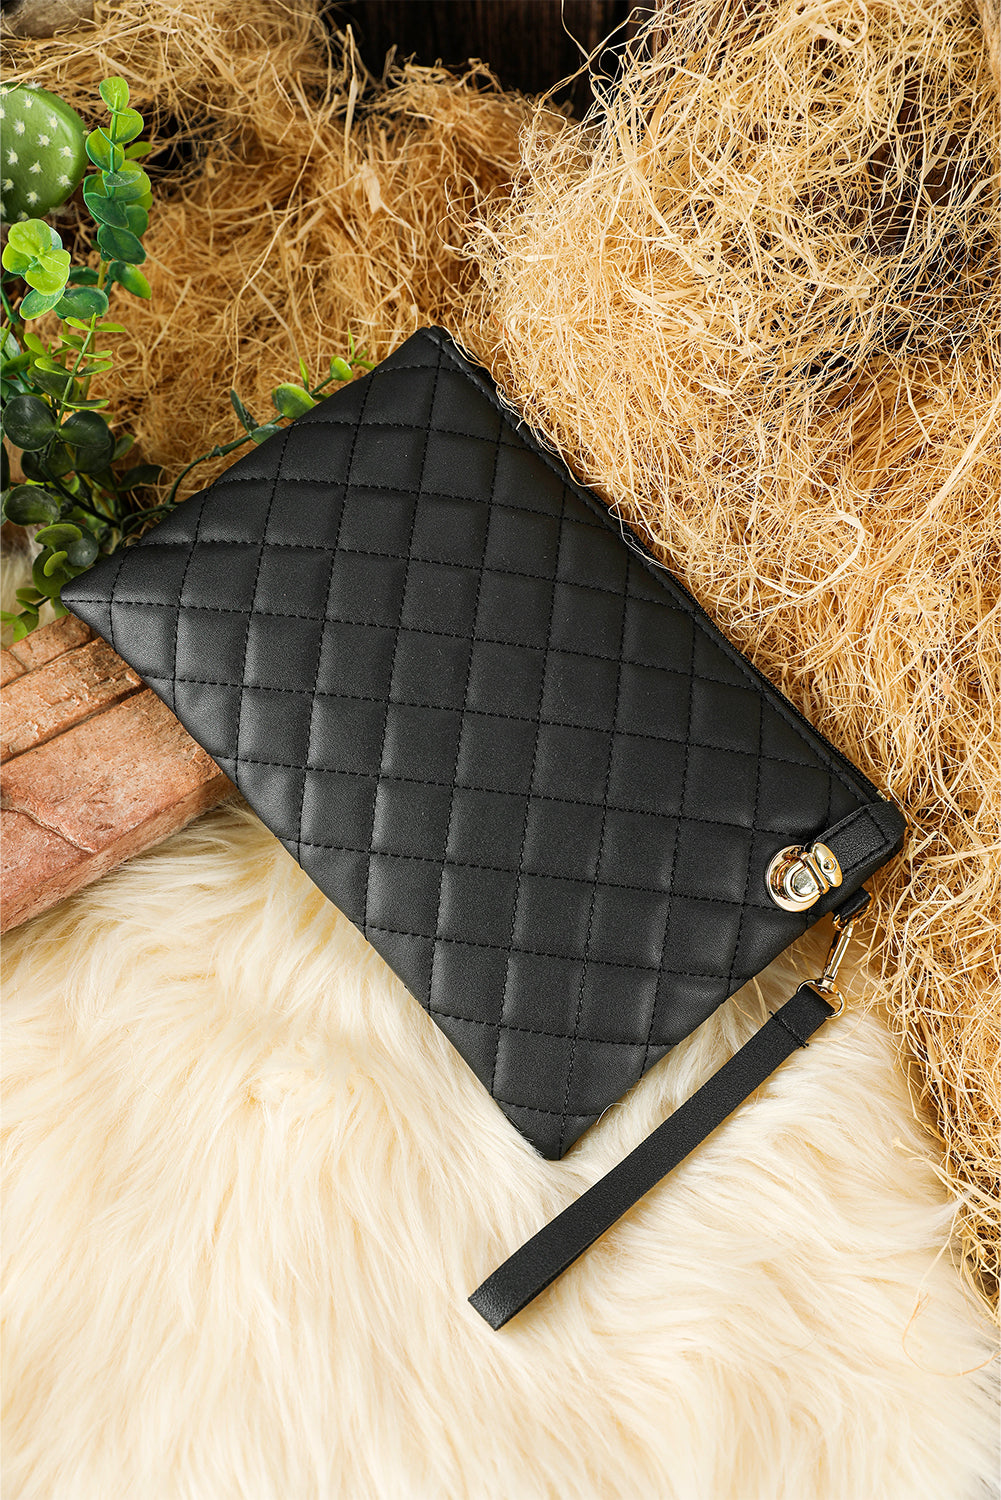 Black Quilted Leather Wrist Strap Clutch Bag